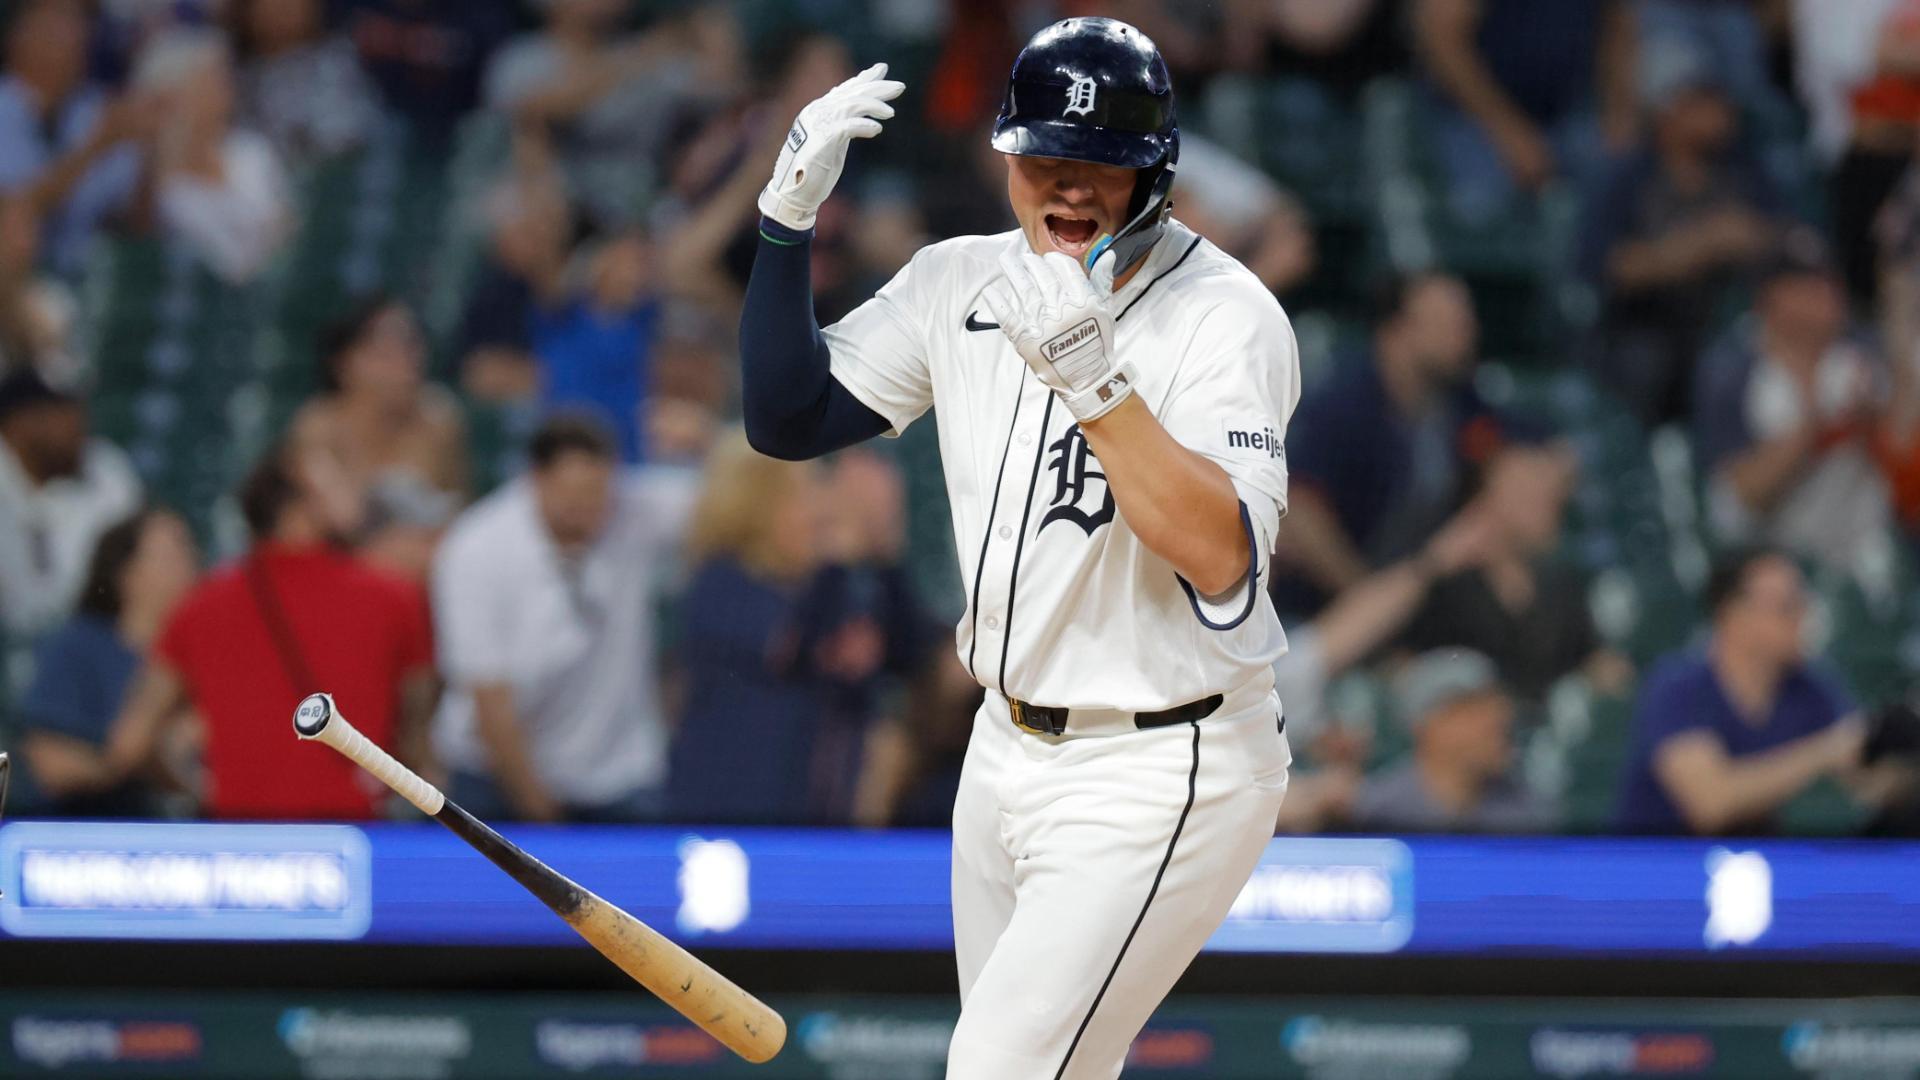 Spencer Torkelson s 2-run HR highlights a late rally as the Tigers beat the Marlins 6-5